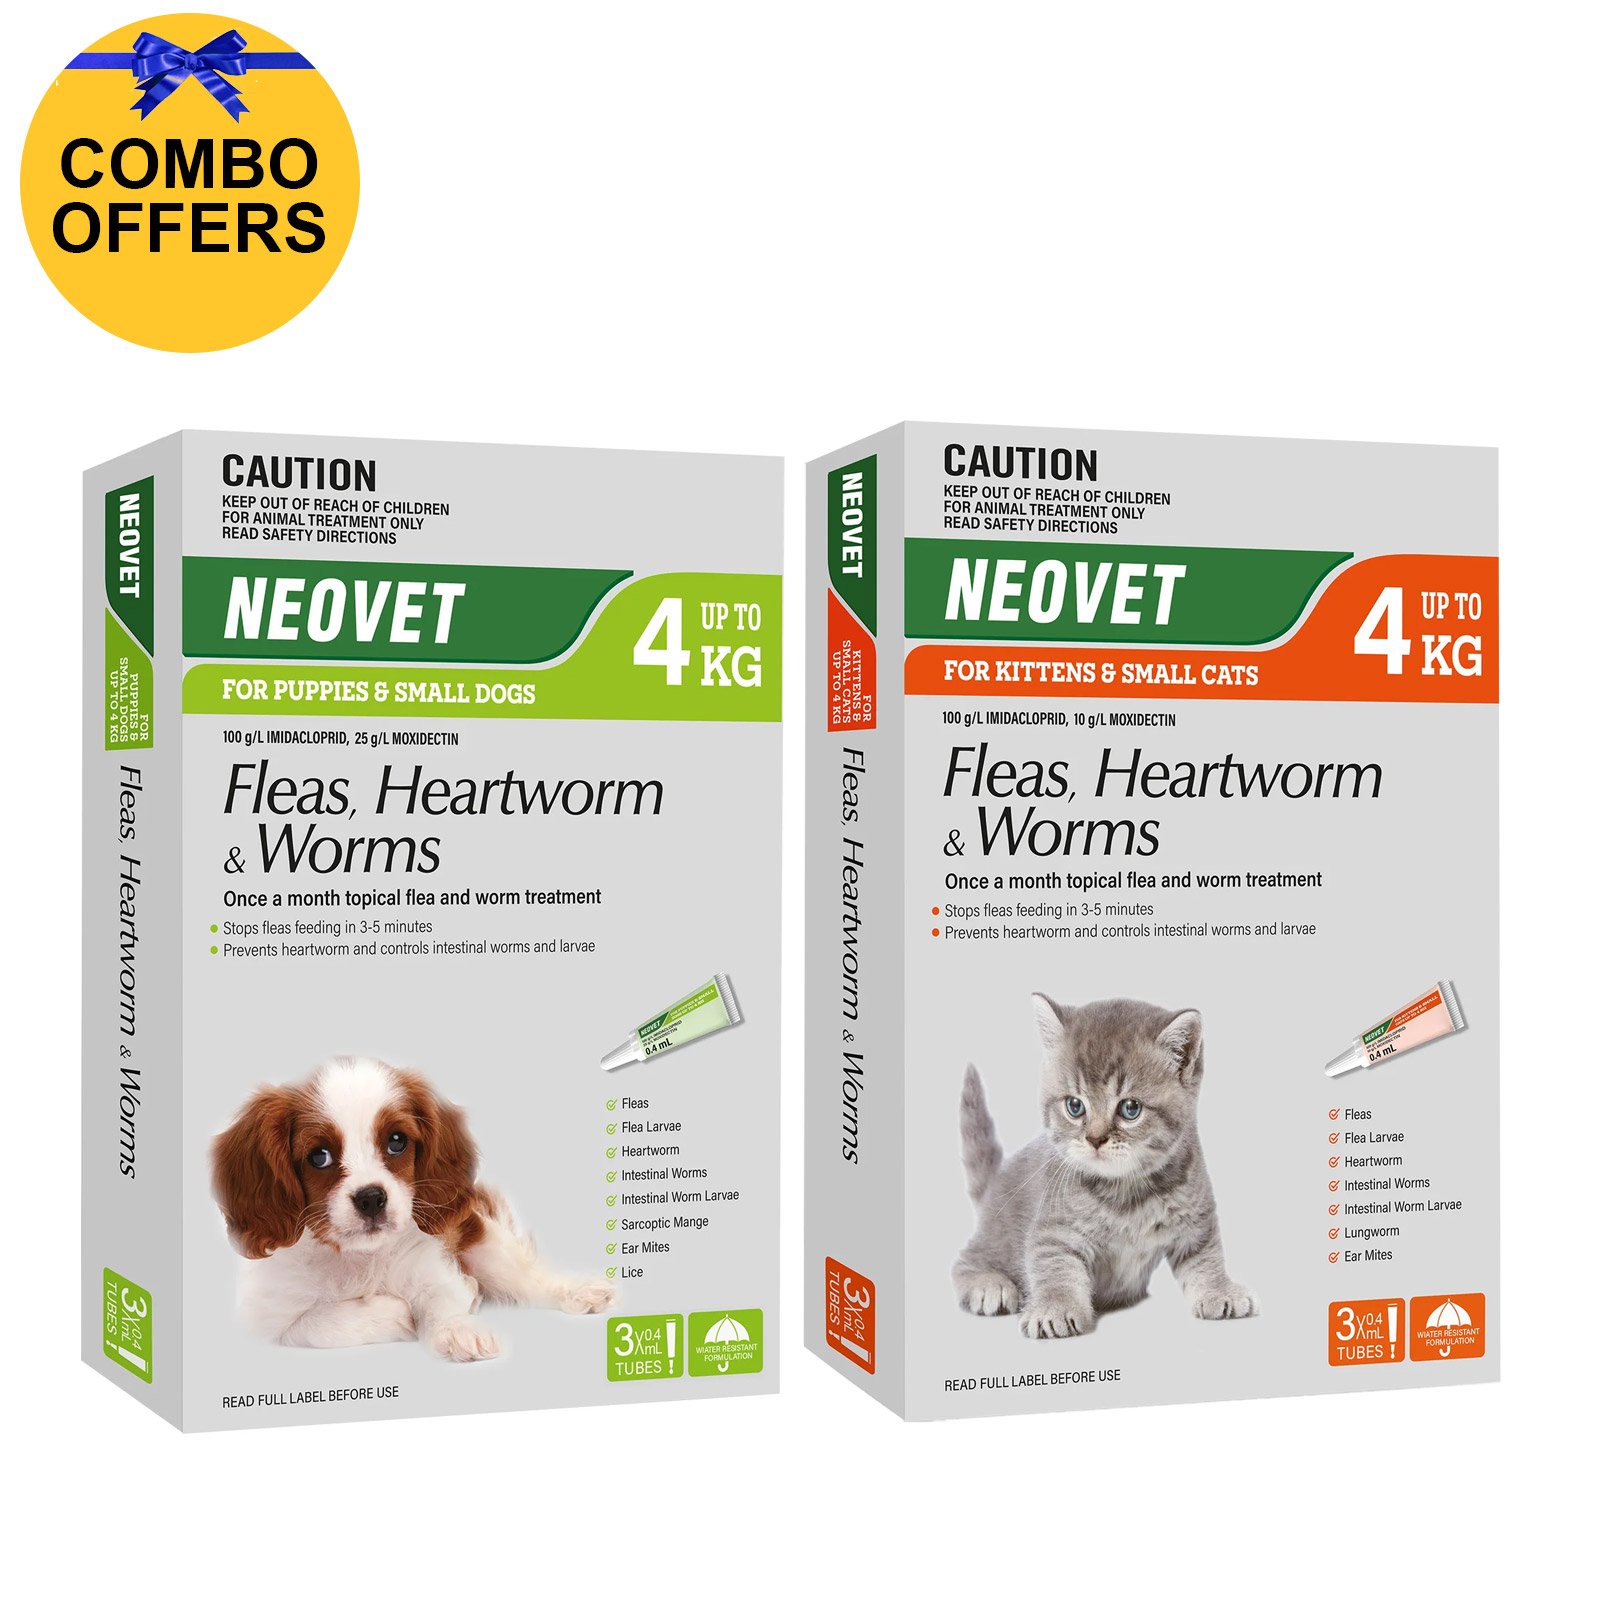 Neovet for Dogs & Neovet for Cats Combo